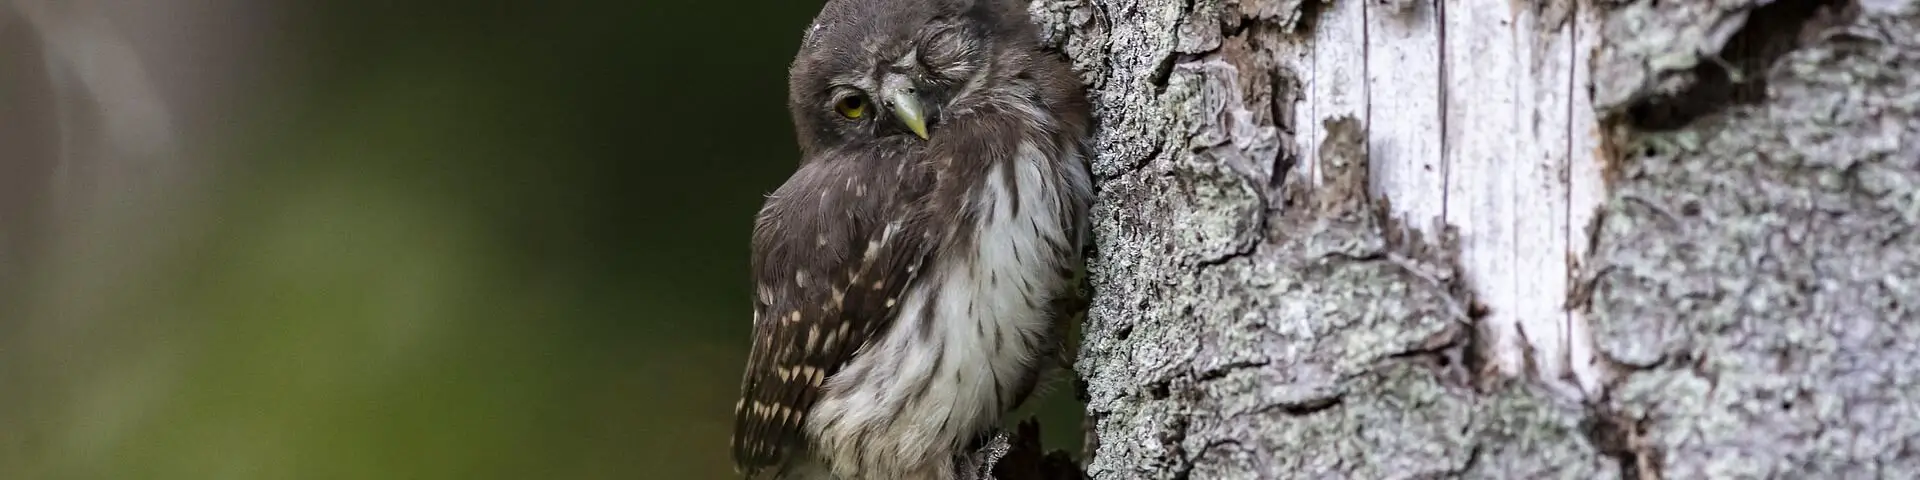 baby-owl-clinging-to-tree